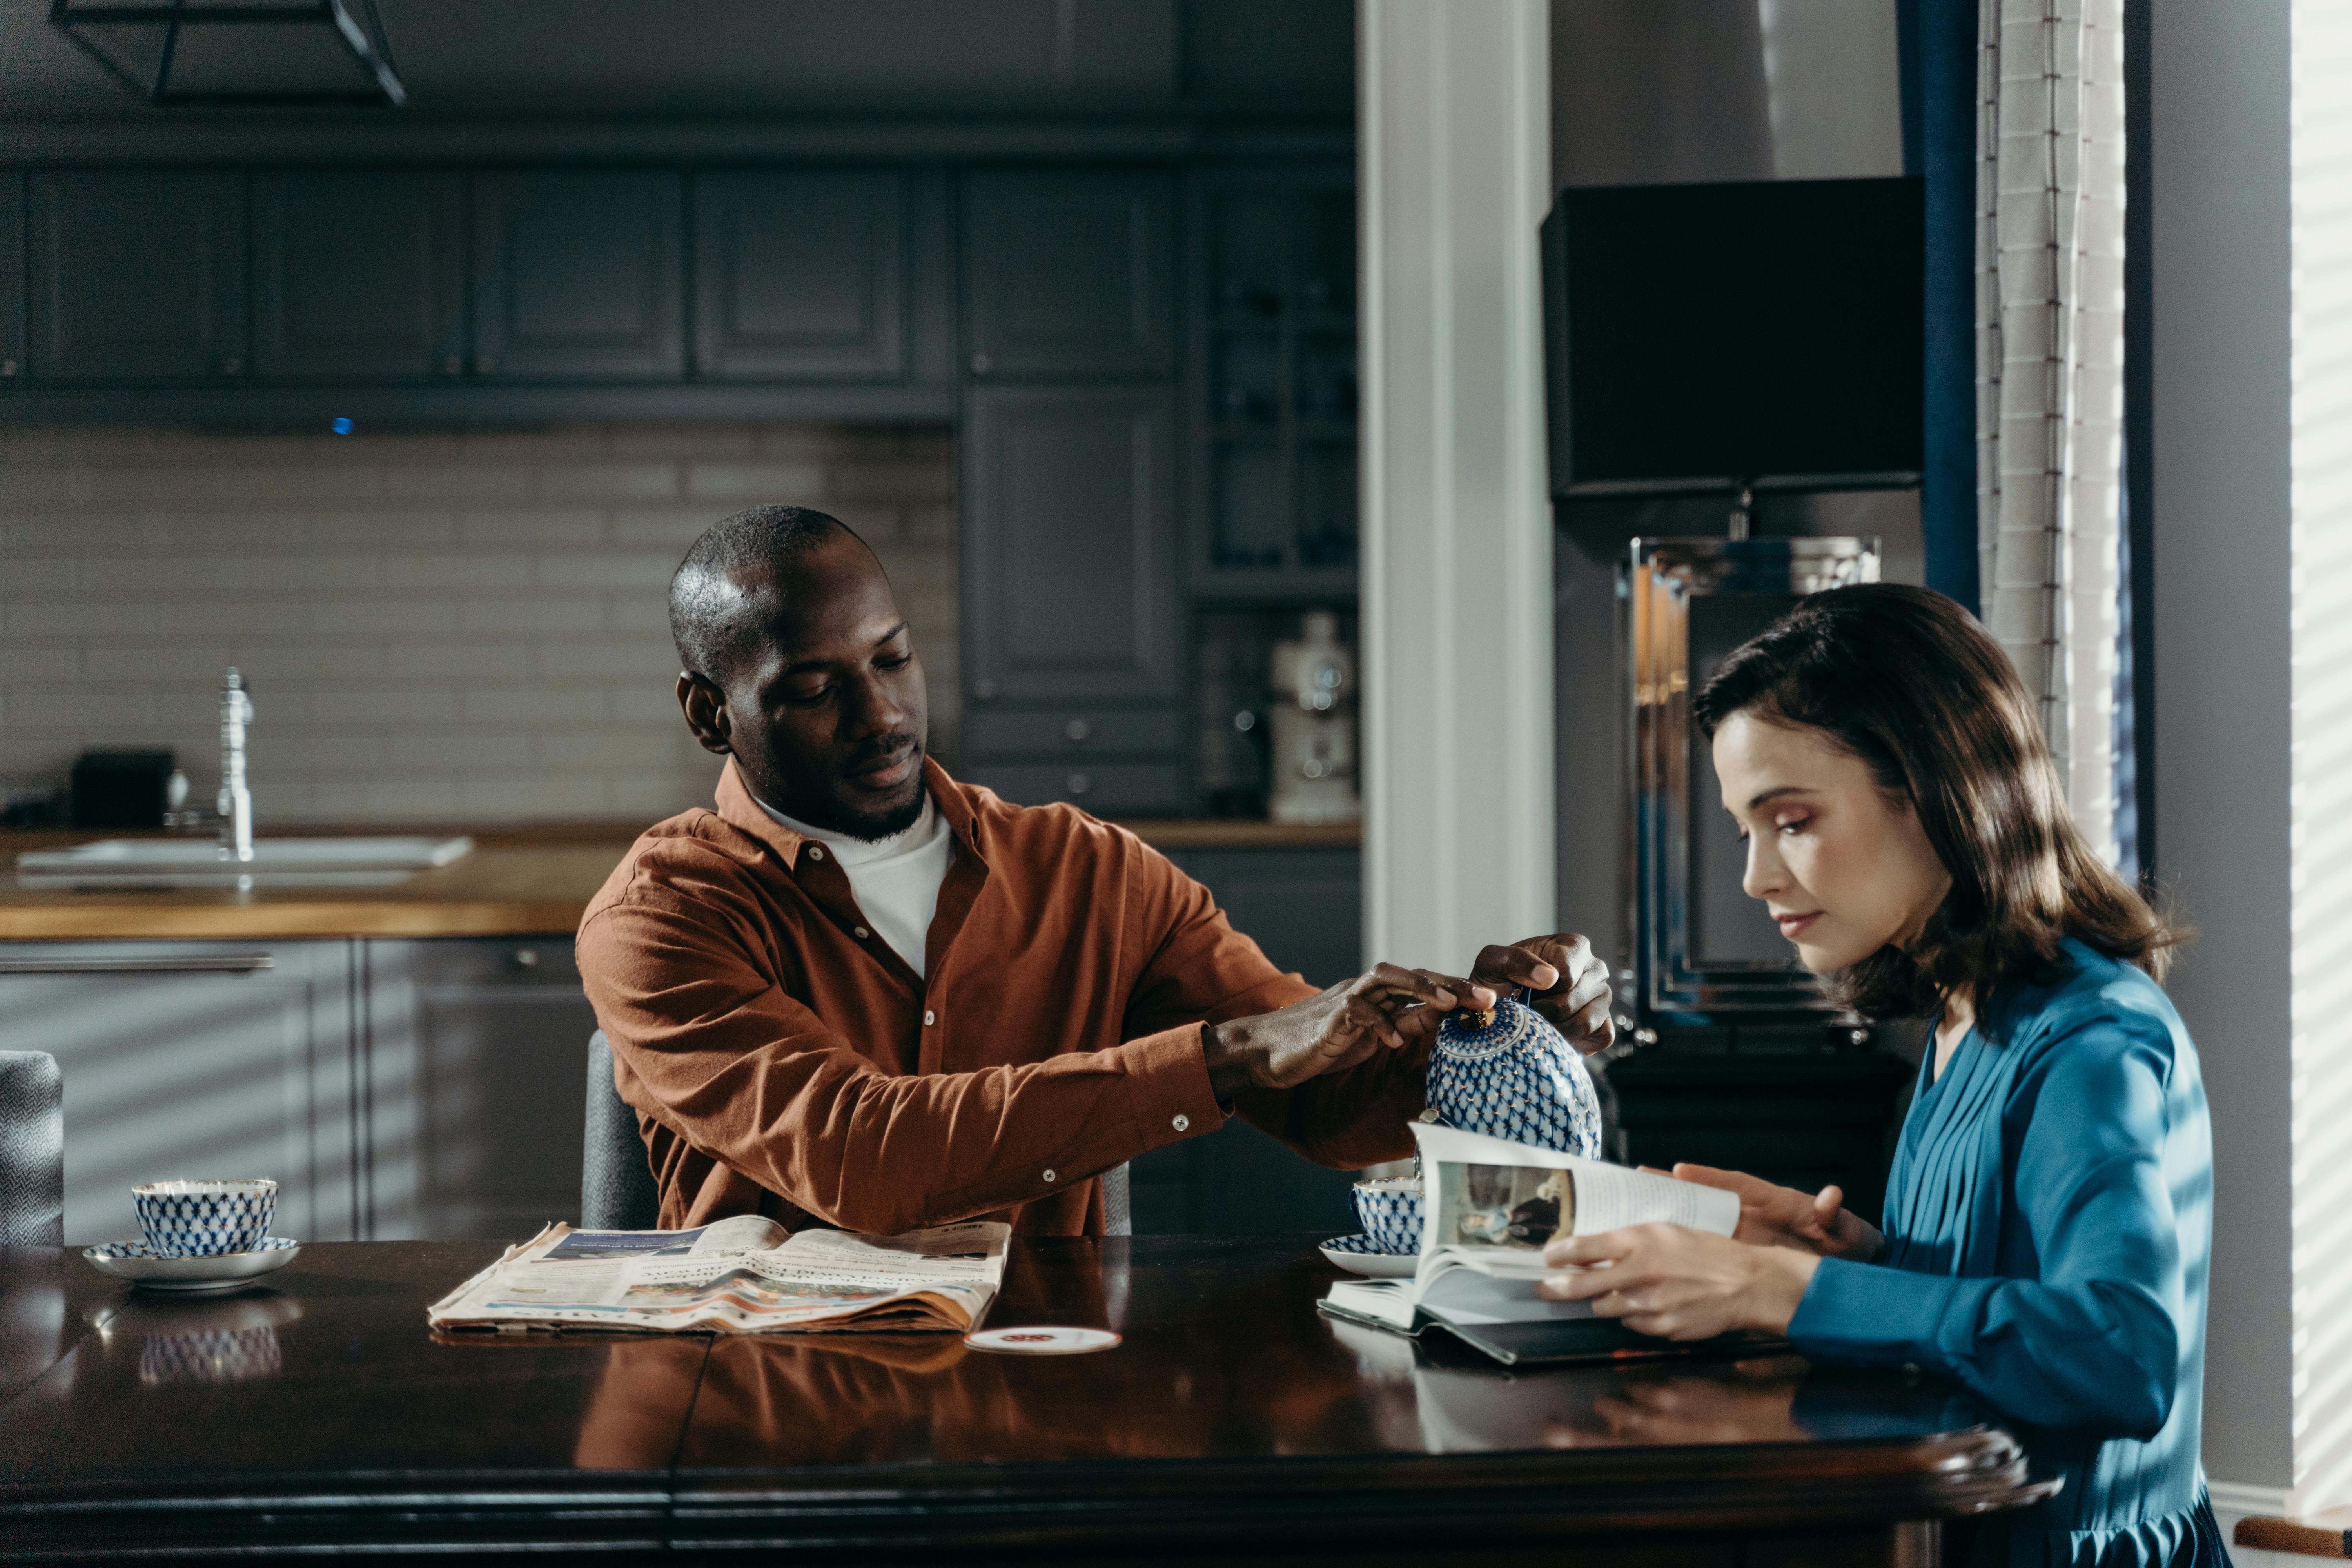 An elegant couple drinking coffee in the kitchen | Source: Pexels